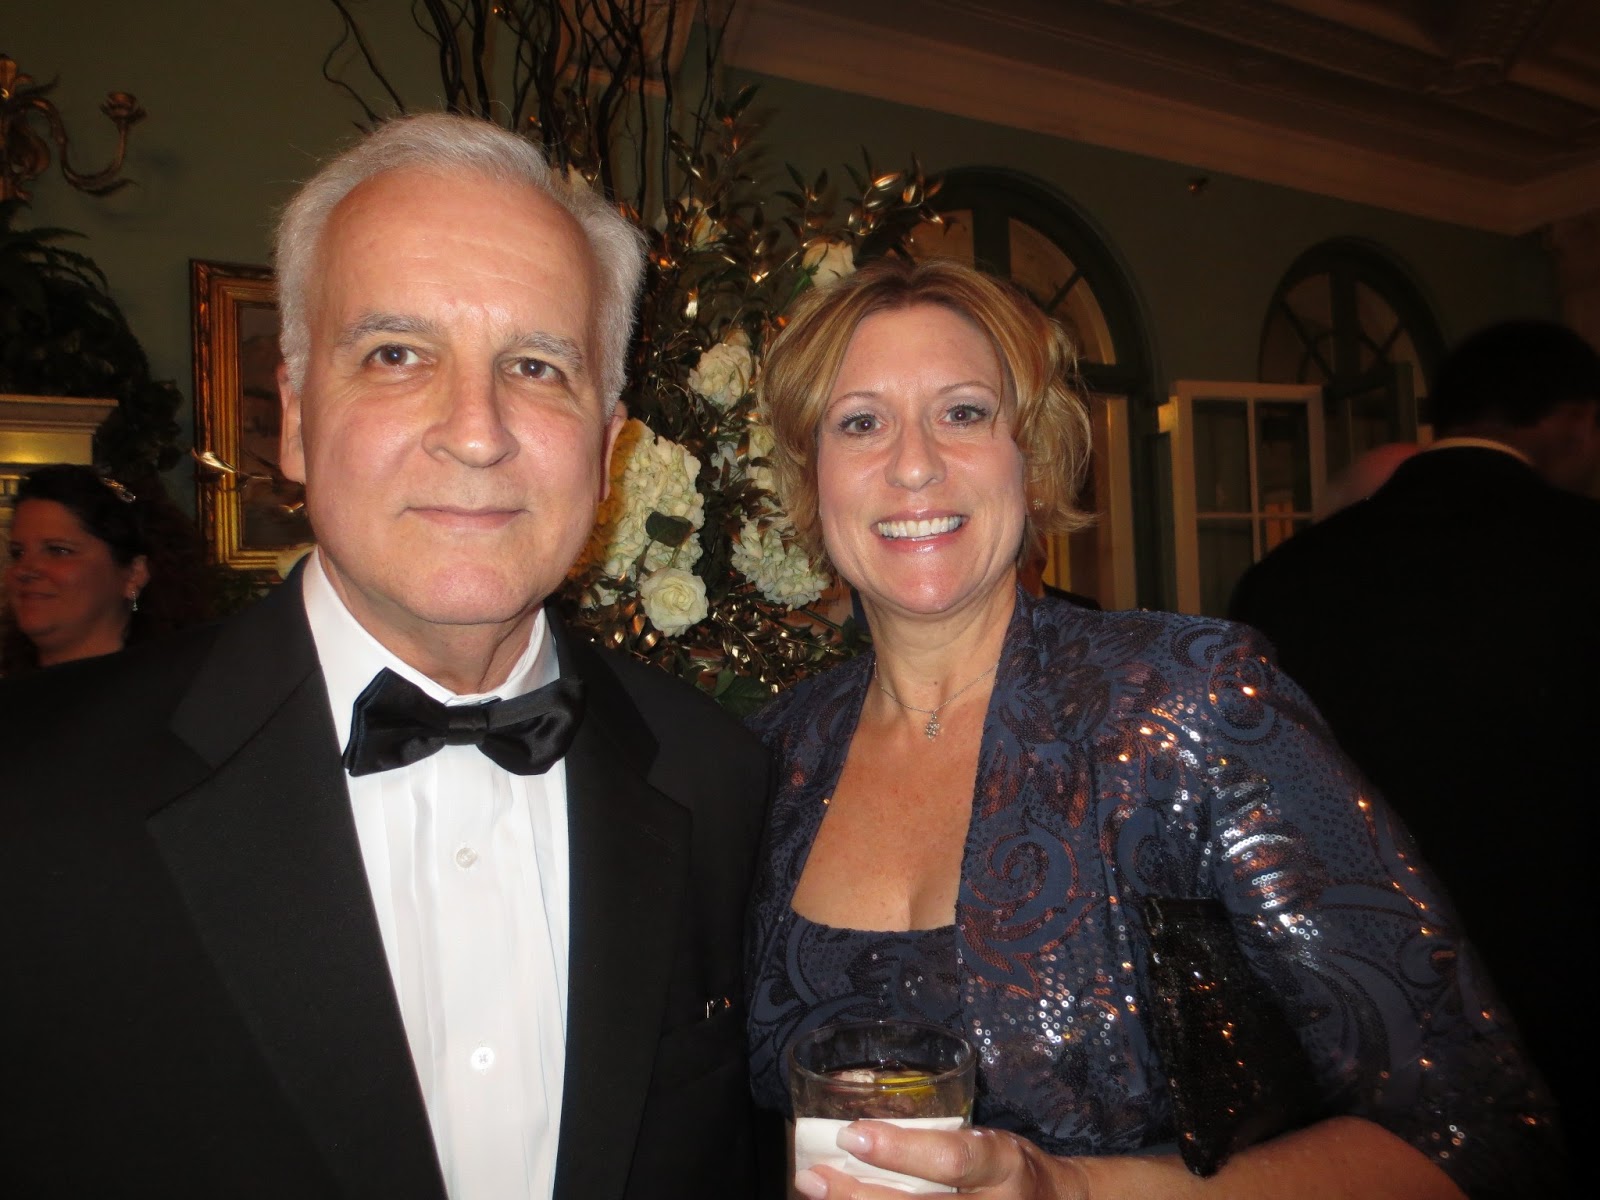 The Civilized Life in Sarasota: New College Inaugural Ball